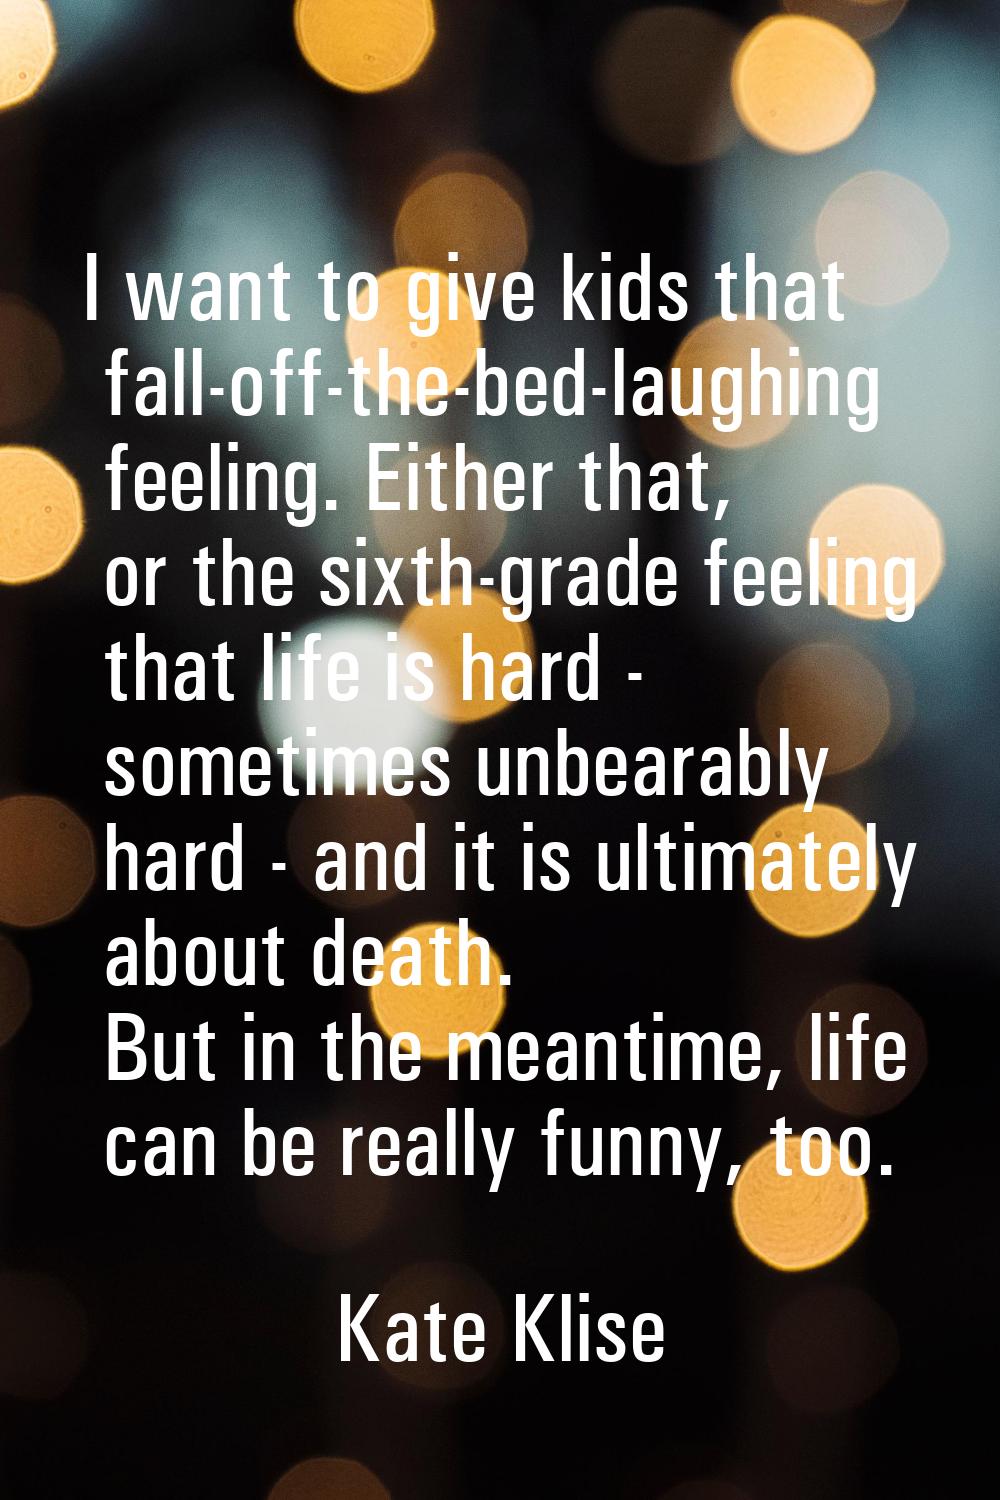 I want to give kids that fall-off-the-bed-laughing feeling. Either that, or the sixth-grade feeling